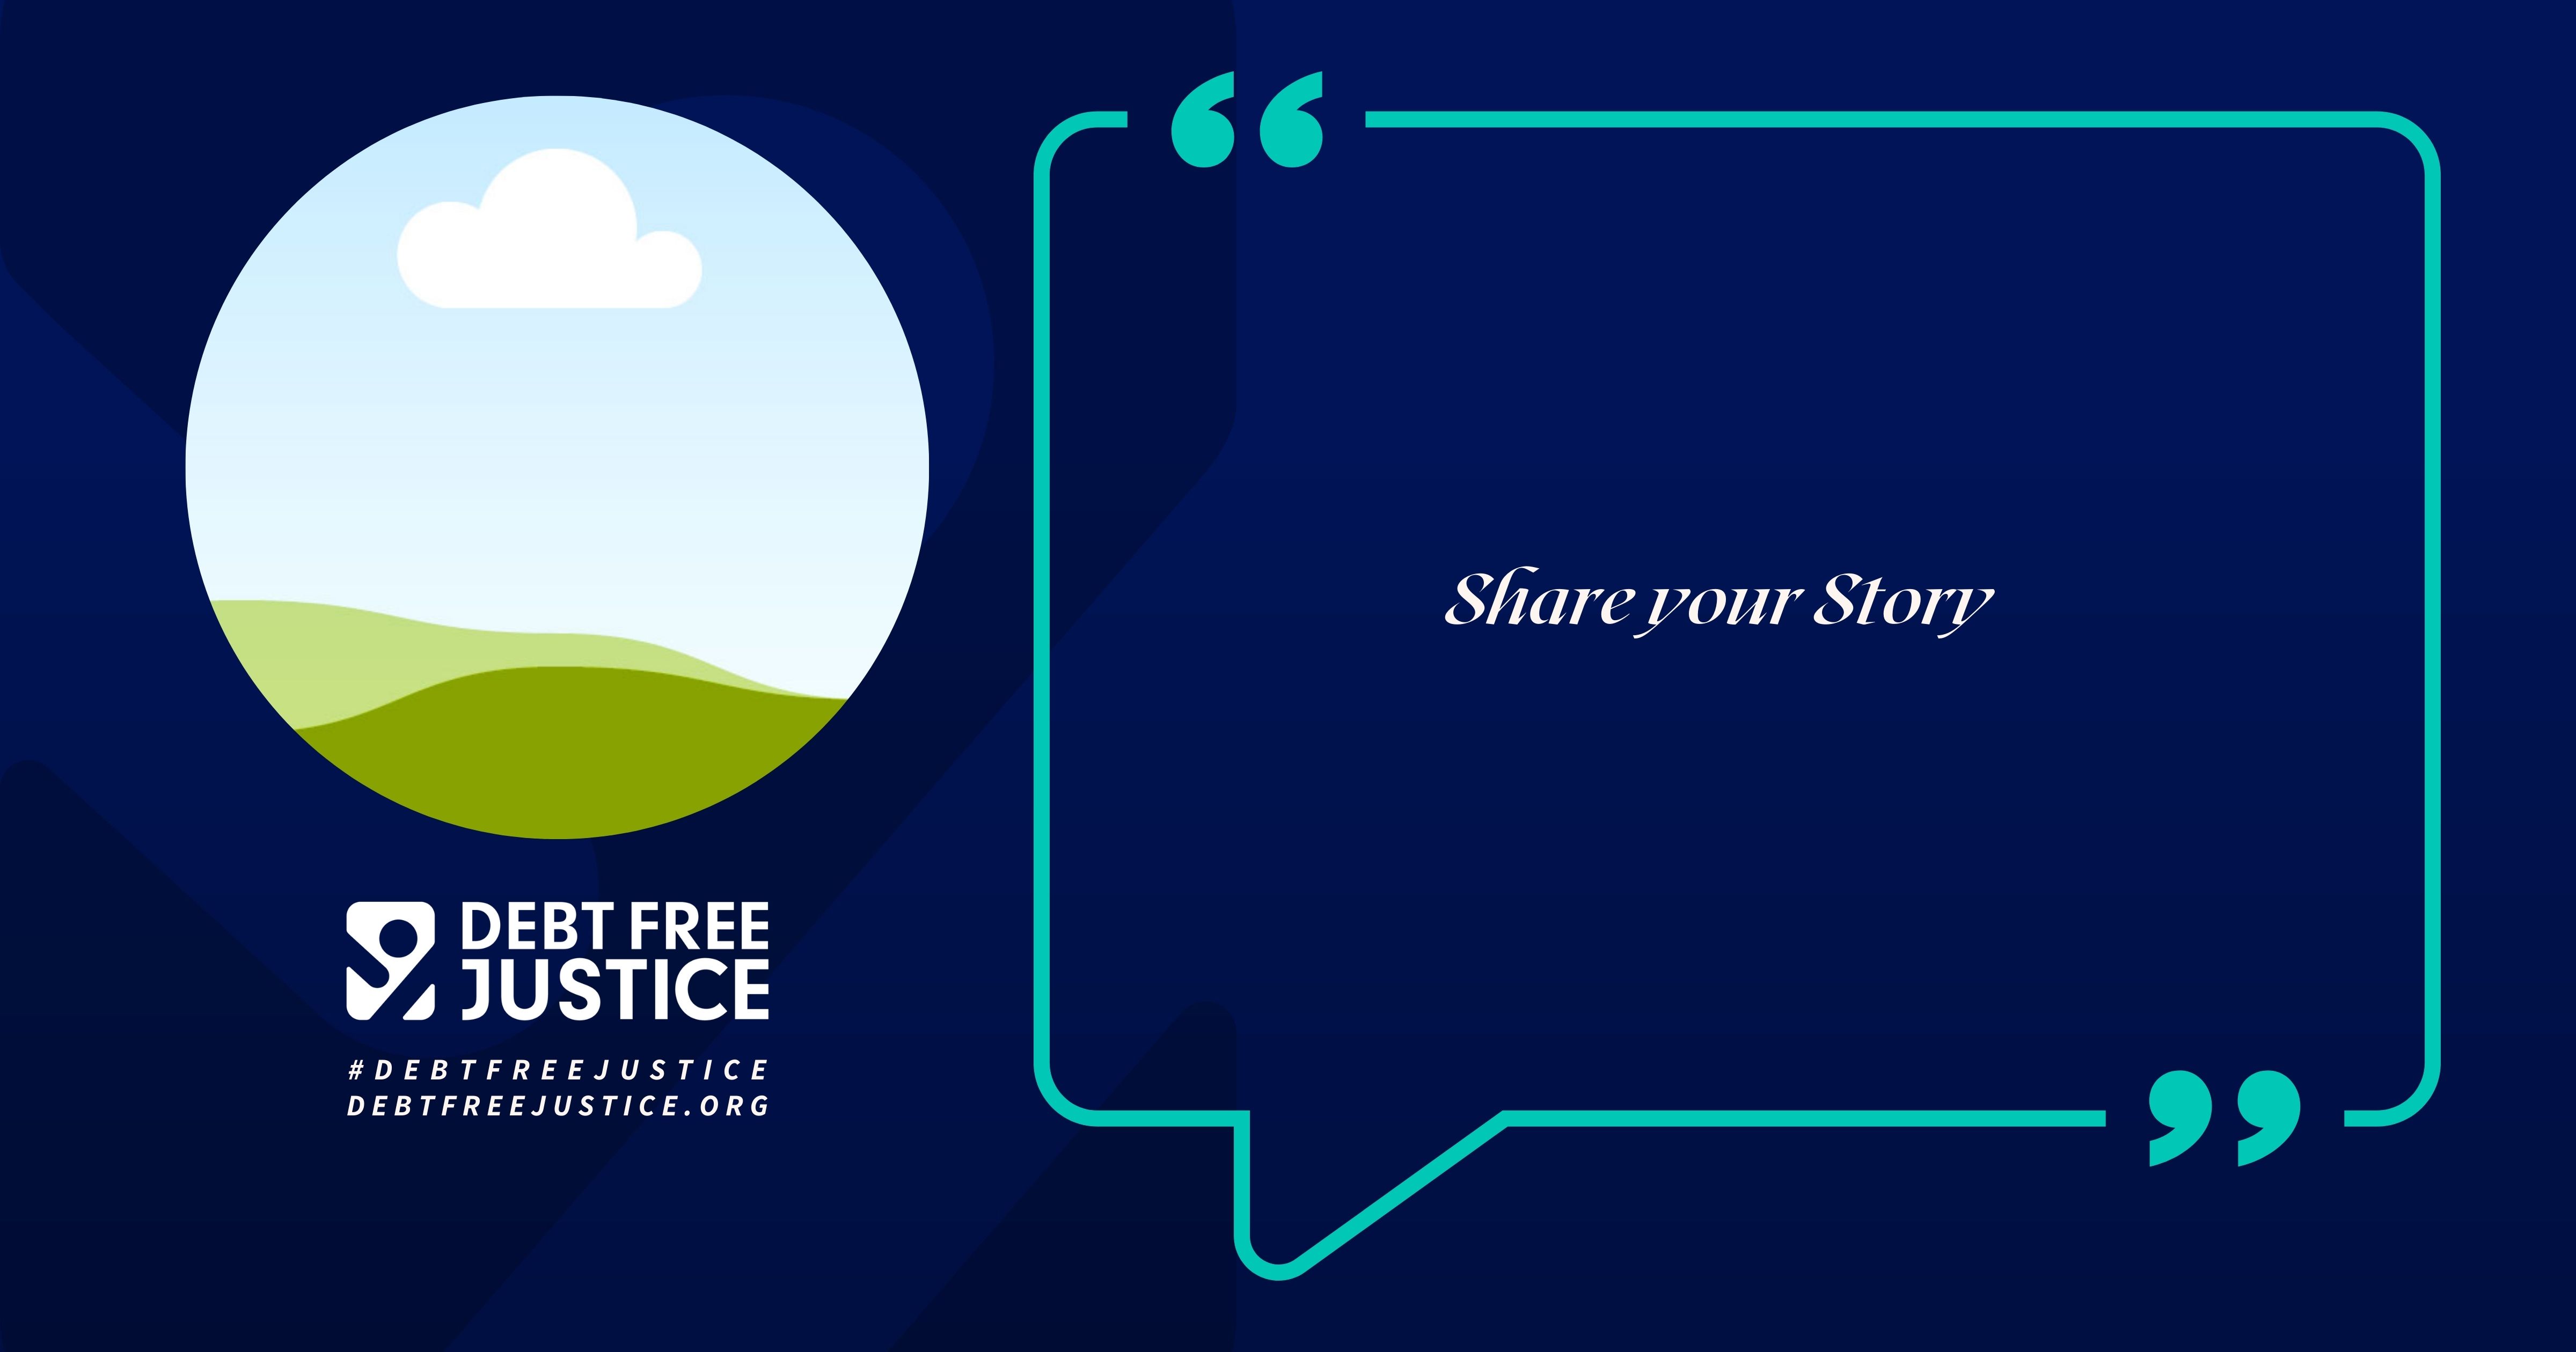 Debt Free Justice Share Your Story